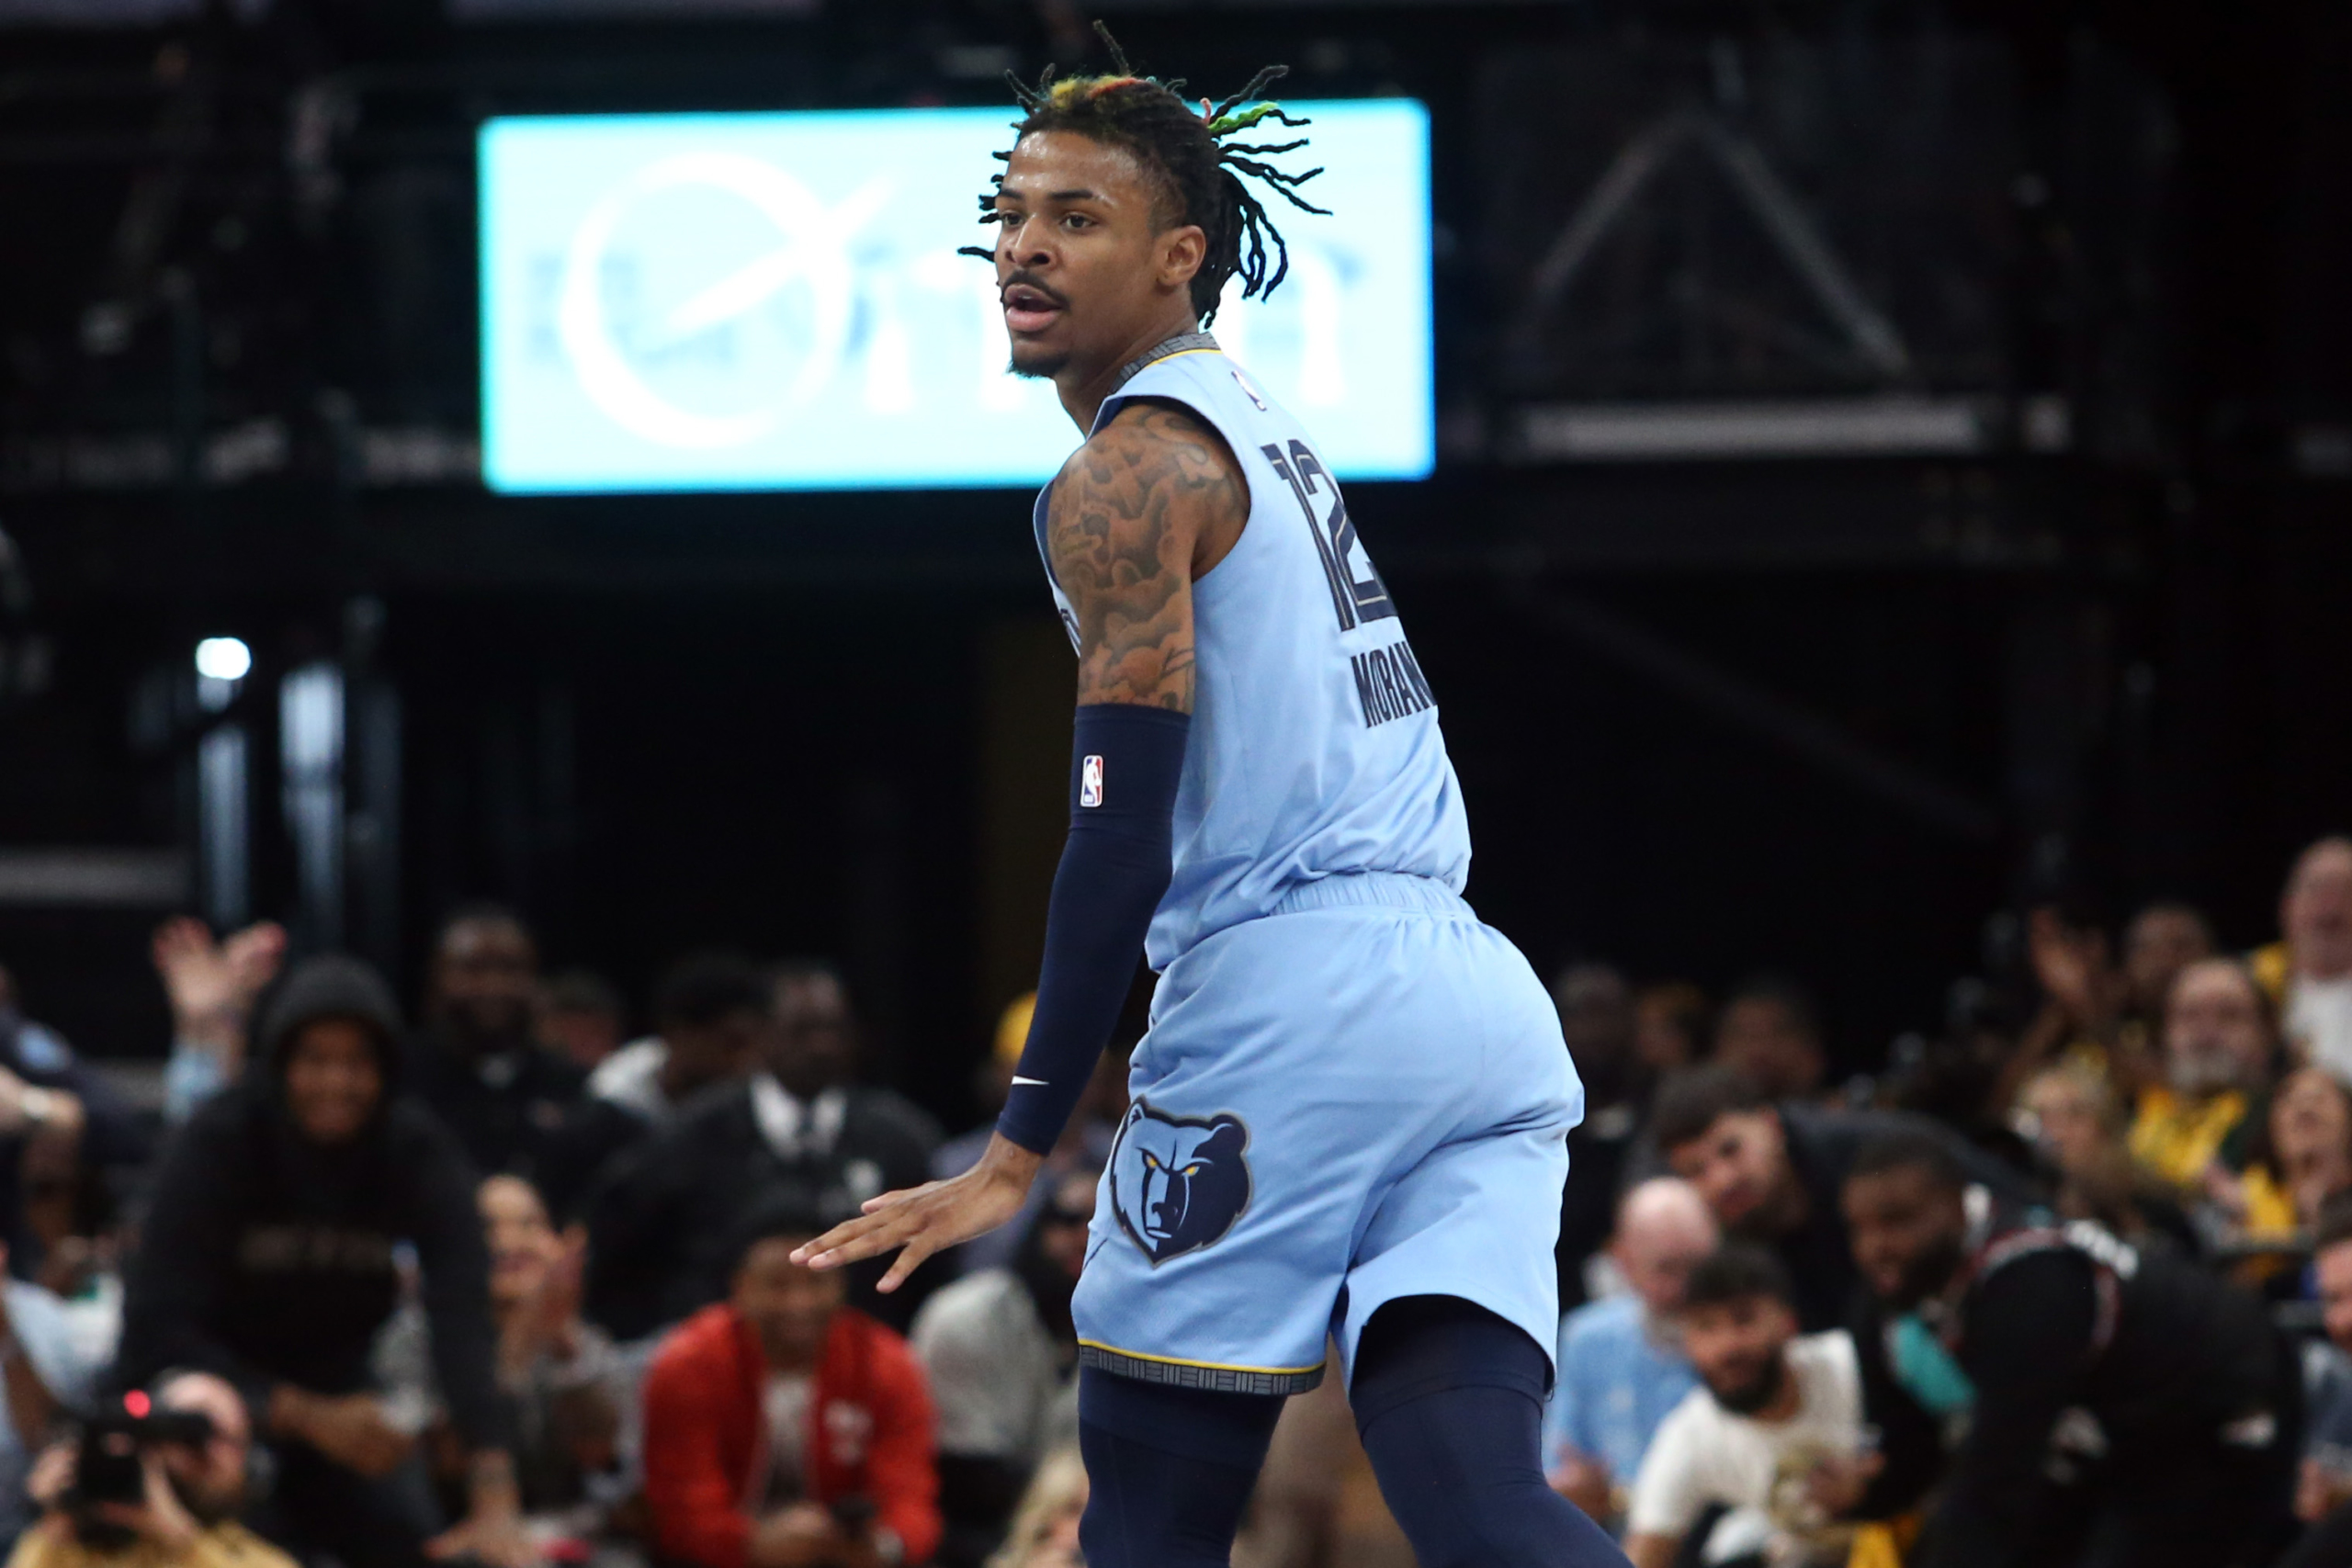 NBA suspends Grizzlies star Ja Morant for 25 games - Los Angeles Times